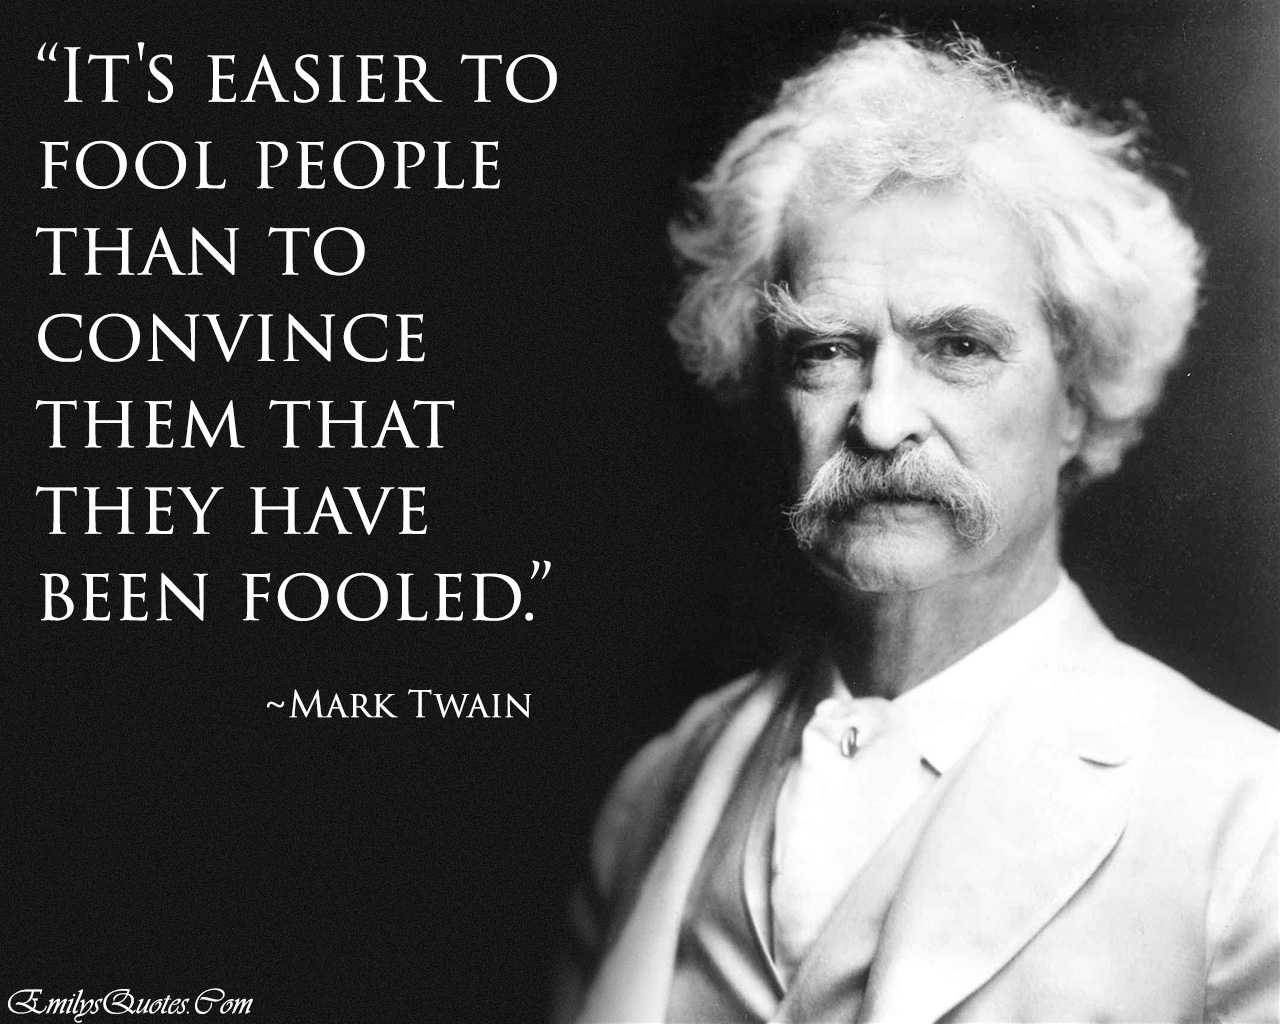 It’s easier to fool people than to convince them that they have been fooled